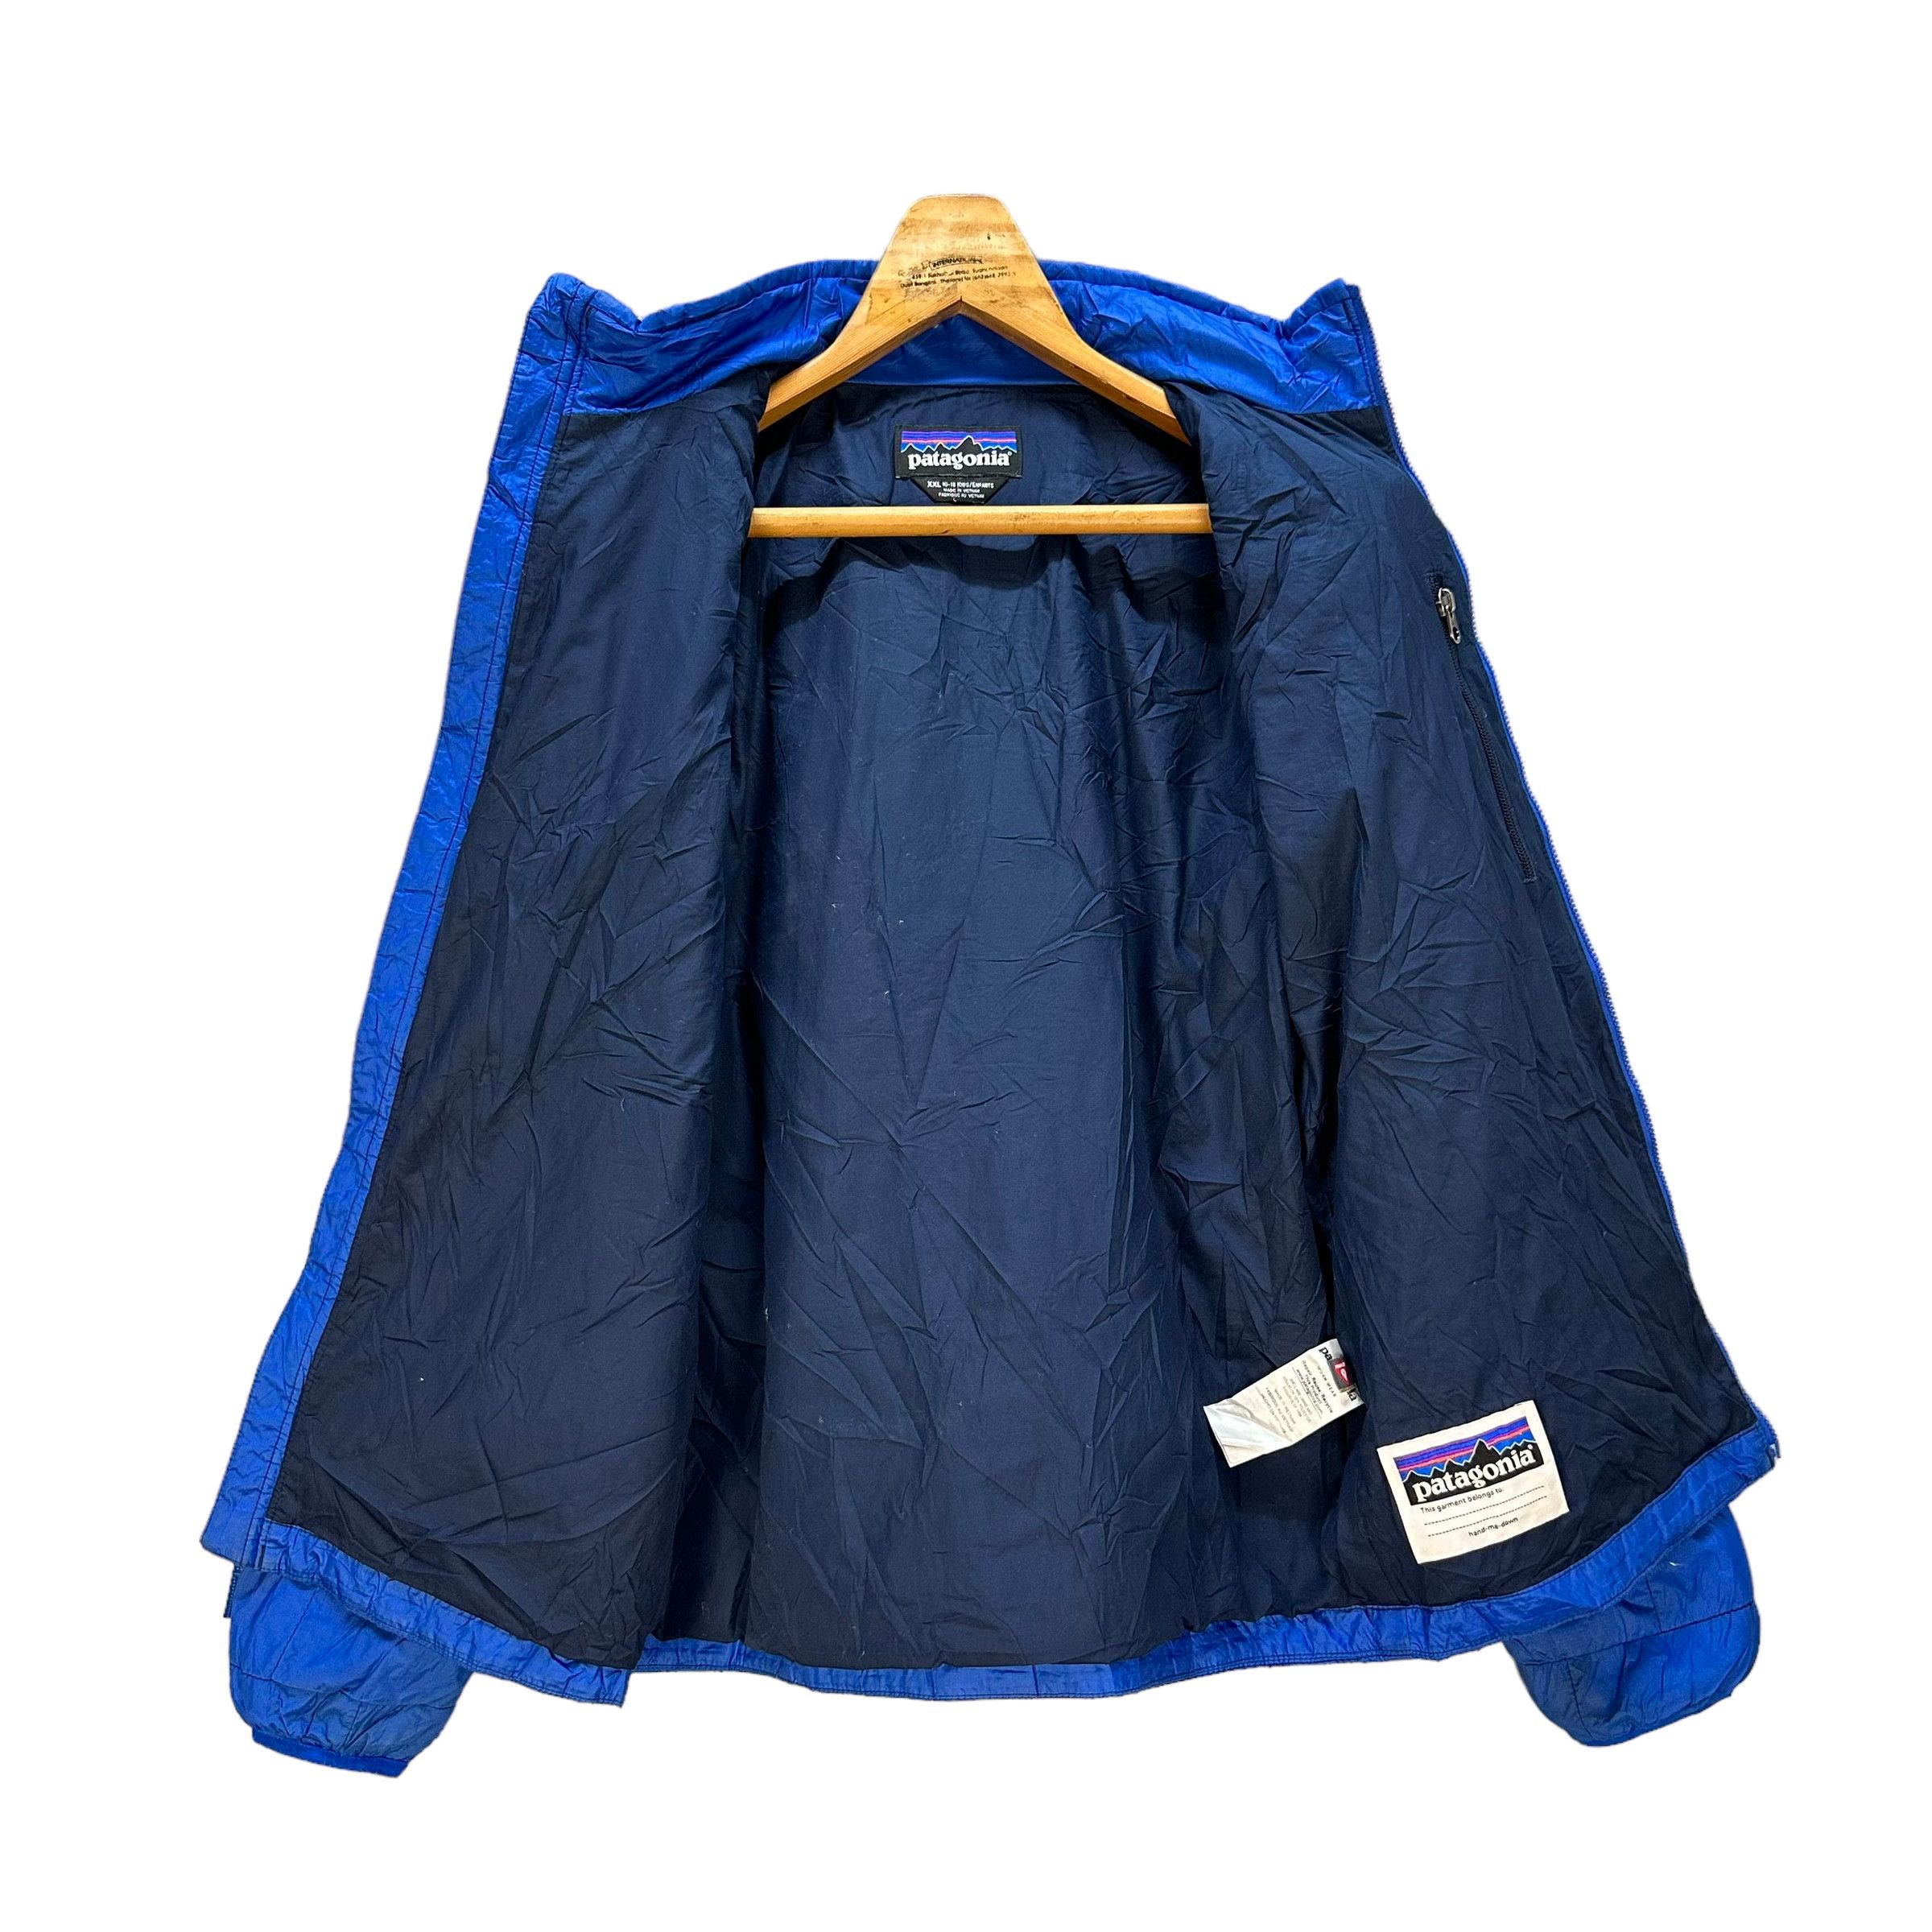 PATAGONIA LIGHT PUFFER JACKET IN BLUE FOR KIDS #9020-48 - 10